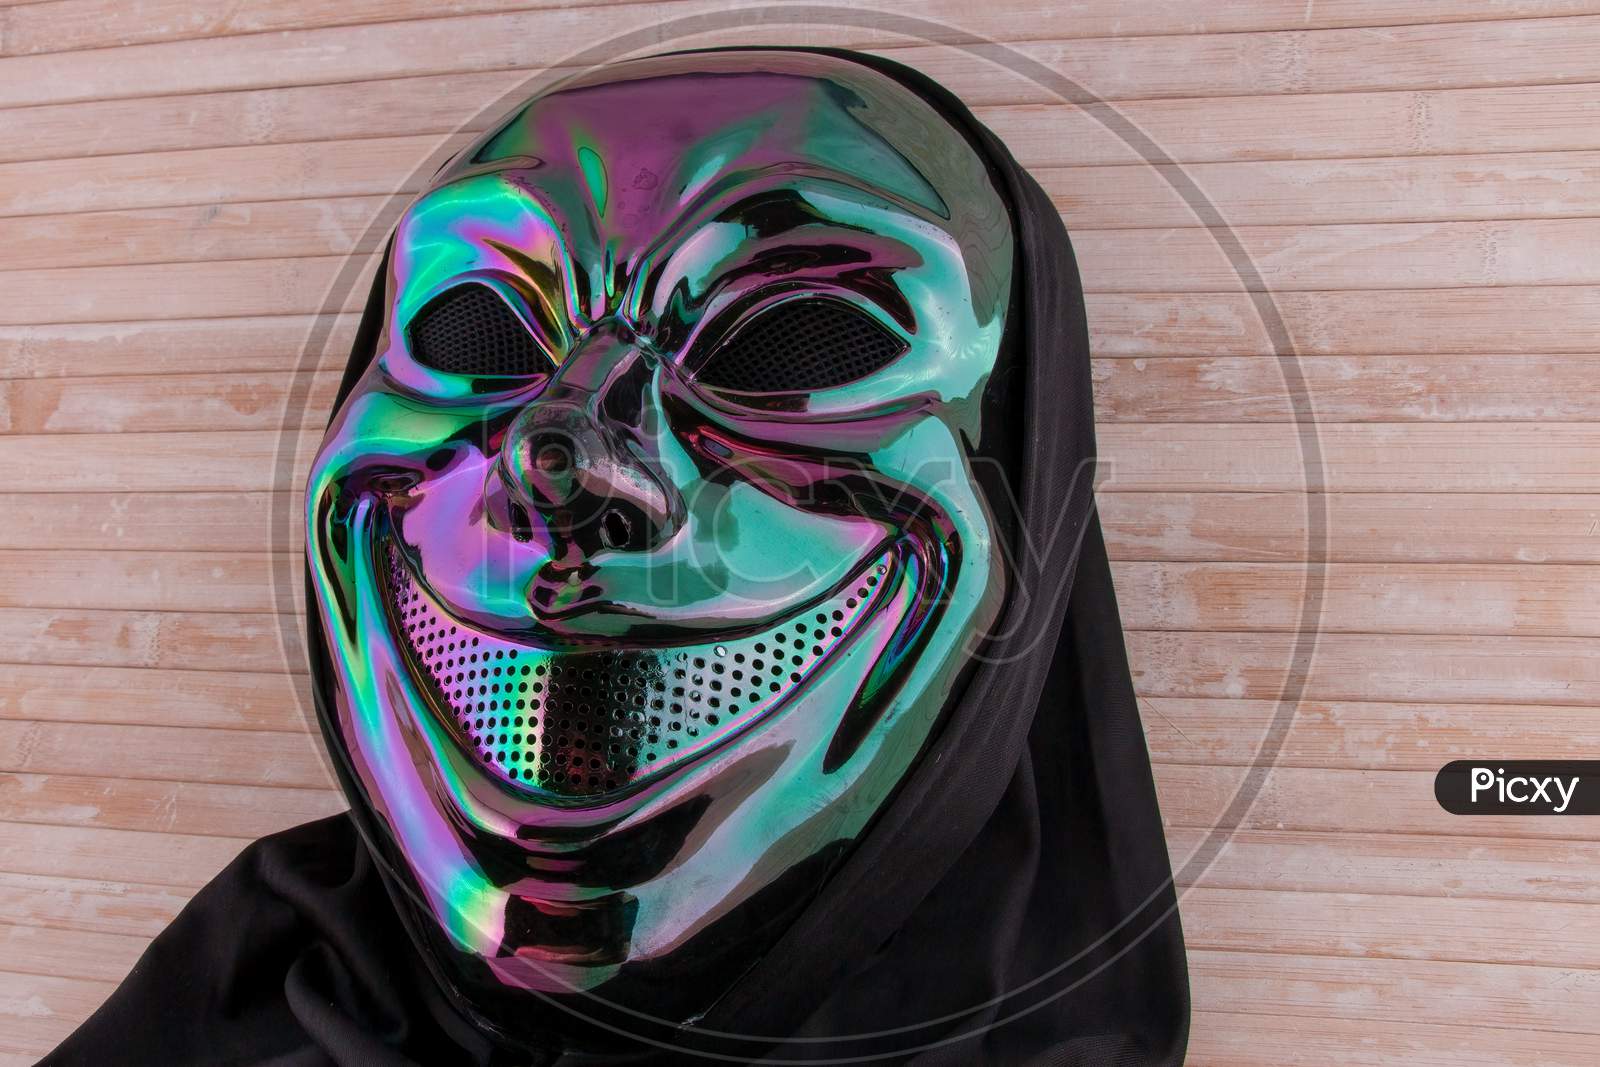 Iridescent Scary Horror Mask With Black Hood